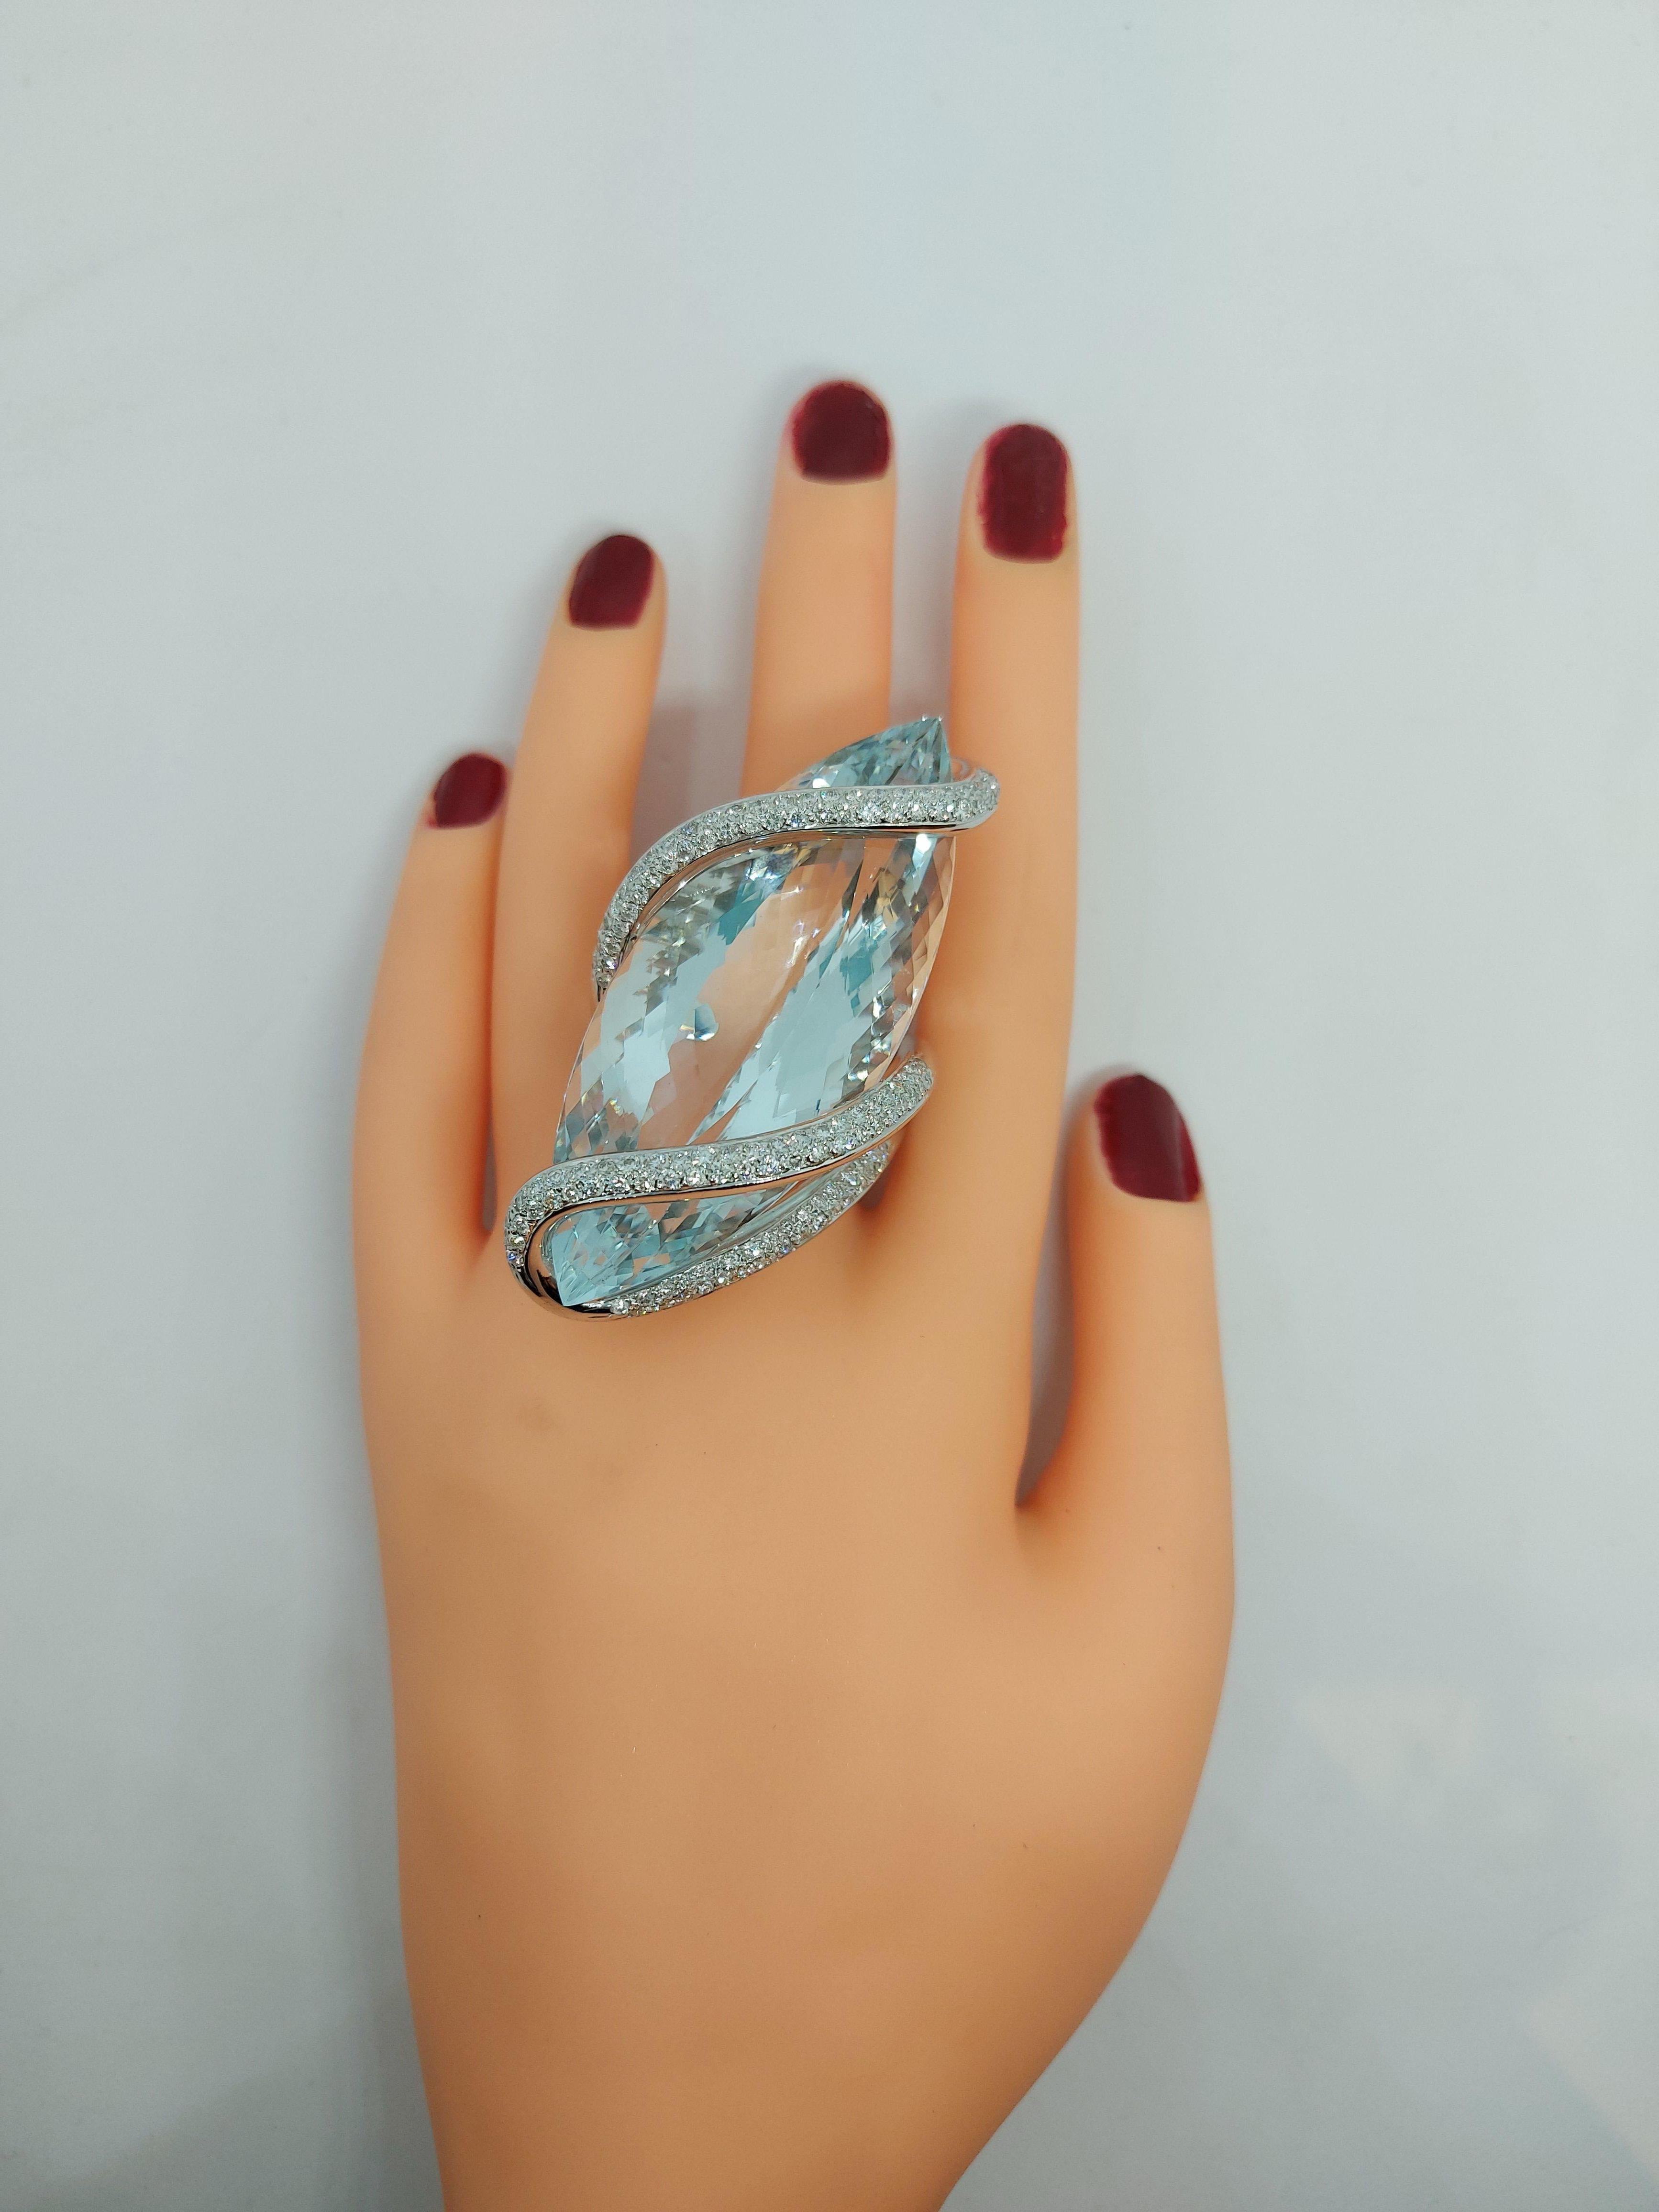 18kt White Gold Huge 150ct Marquise Cut Aquamarine Ring with 3.85ct Diamonds For Sale 10